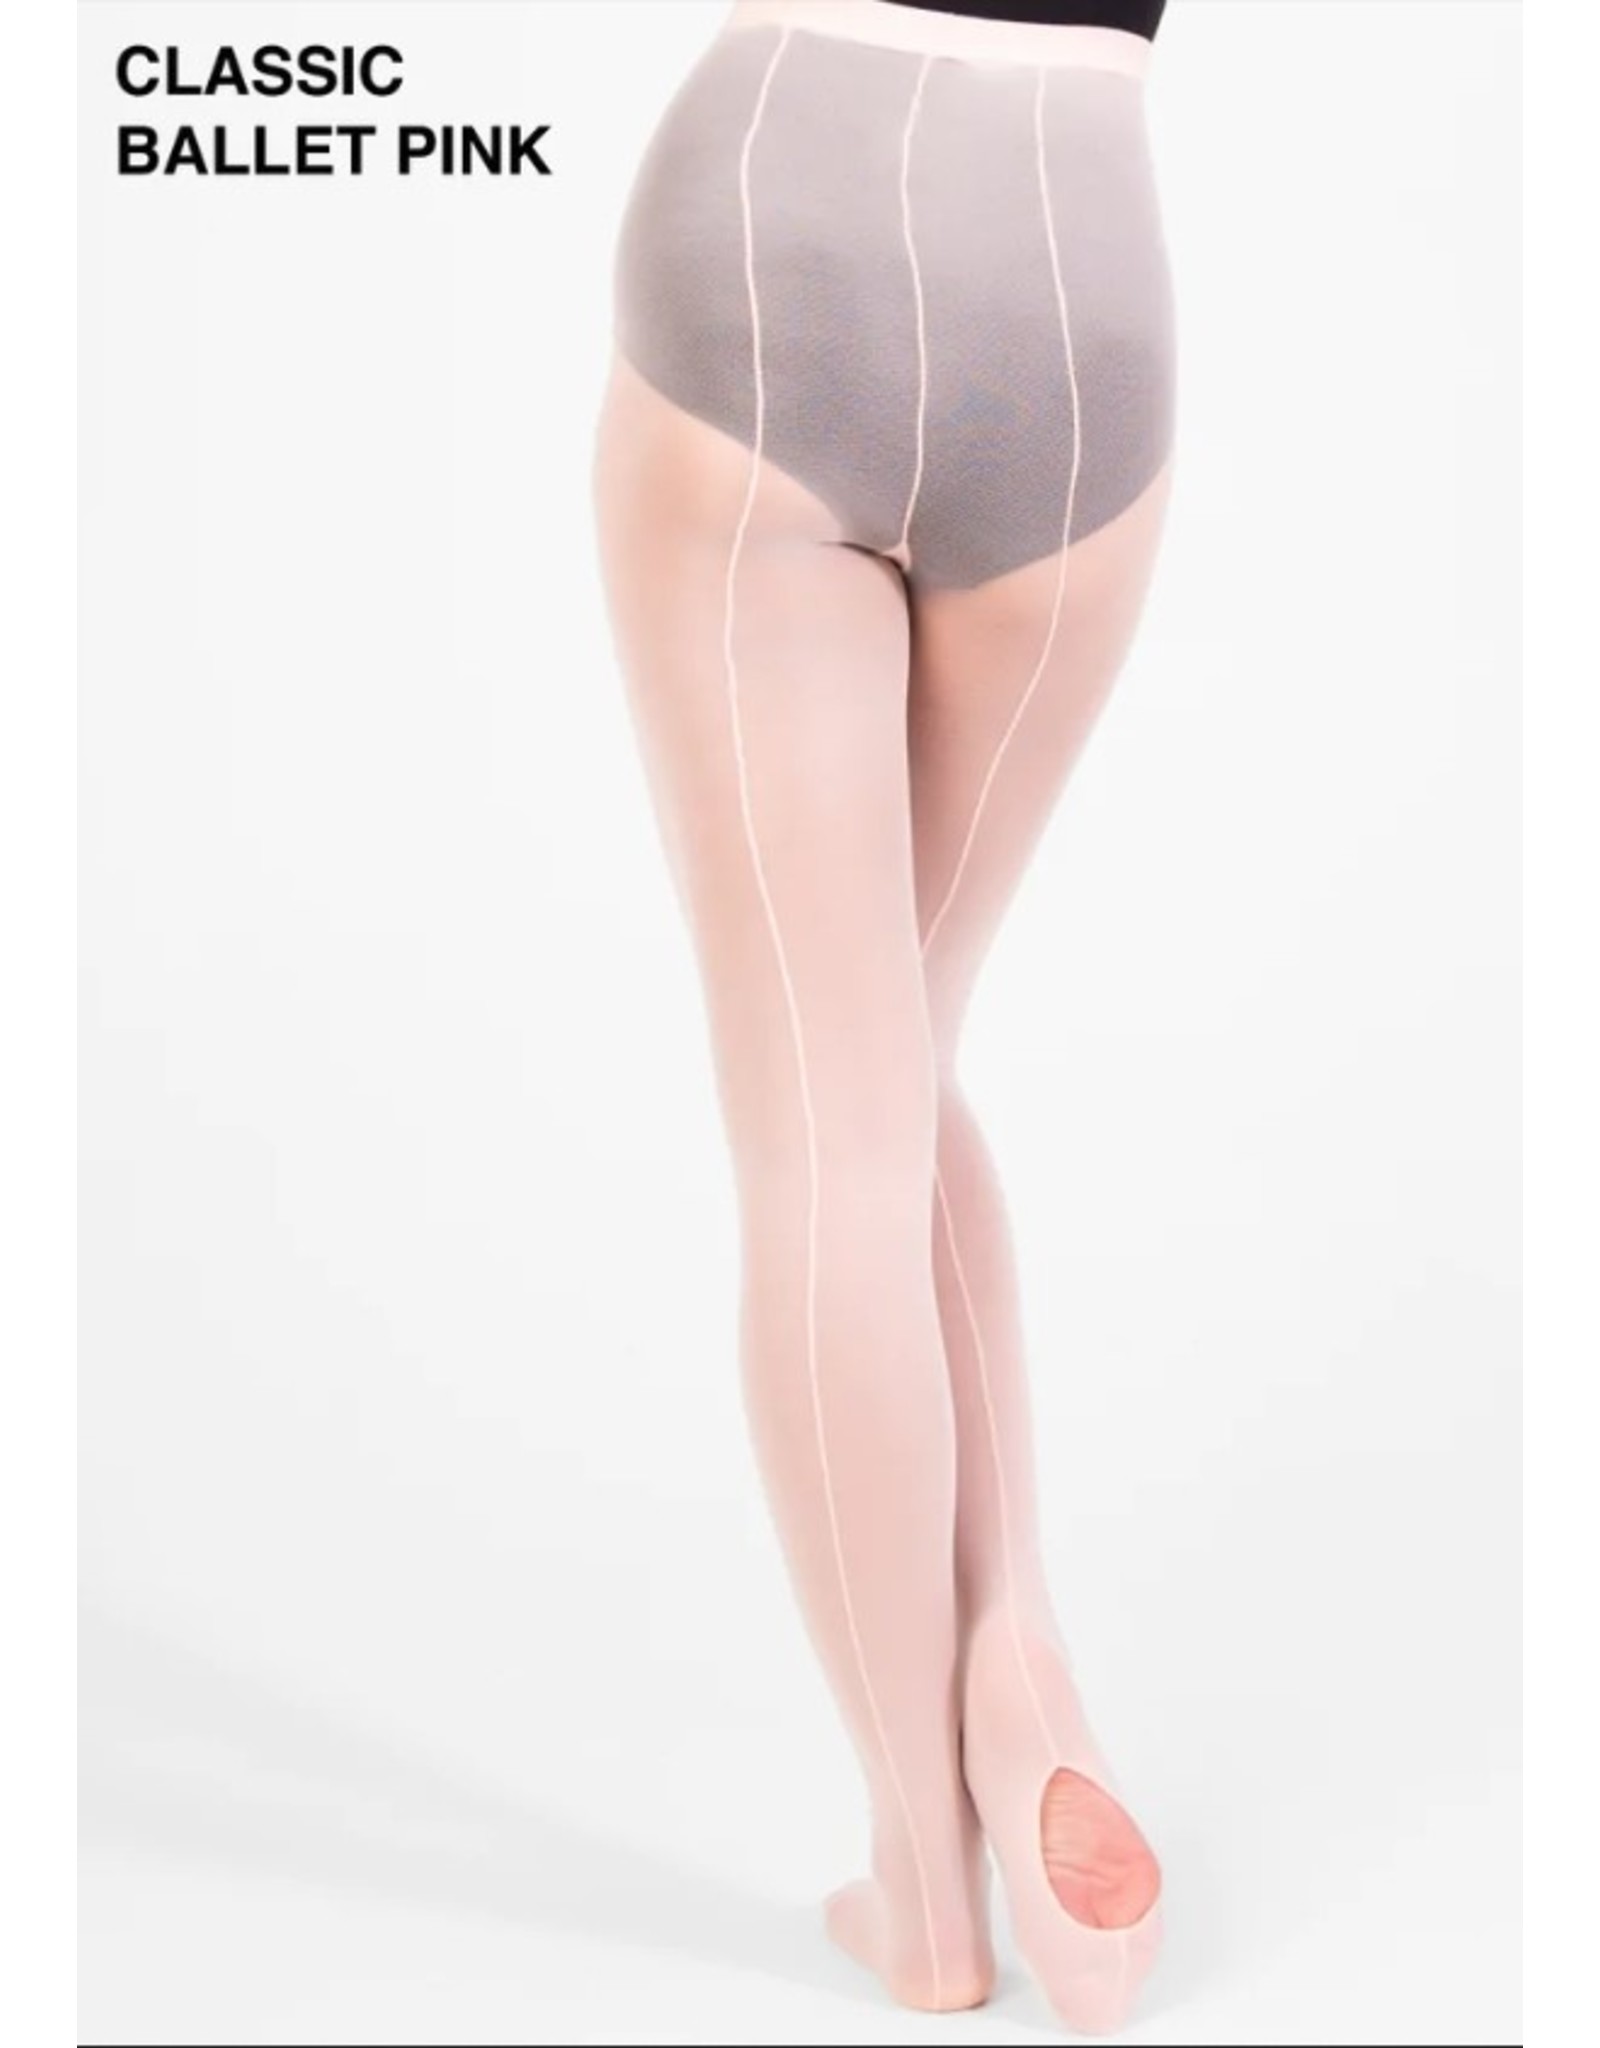 Body Wrappers TotalSTRETCH Sheer Weight Mesh Backseam Tights (A46)